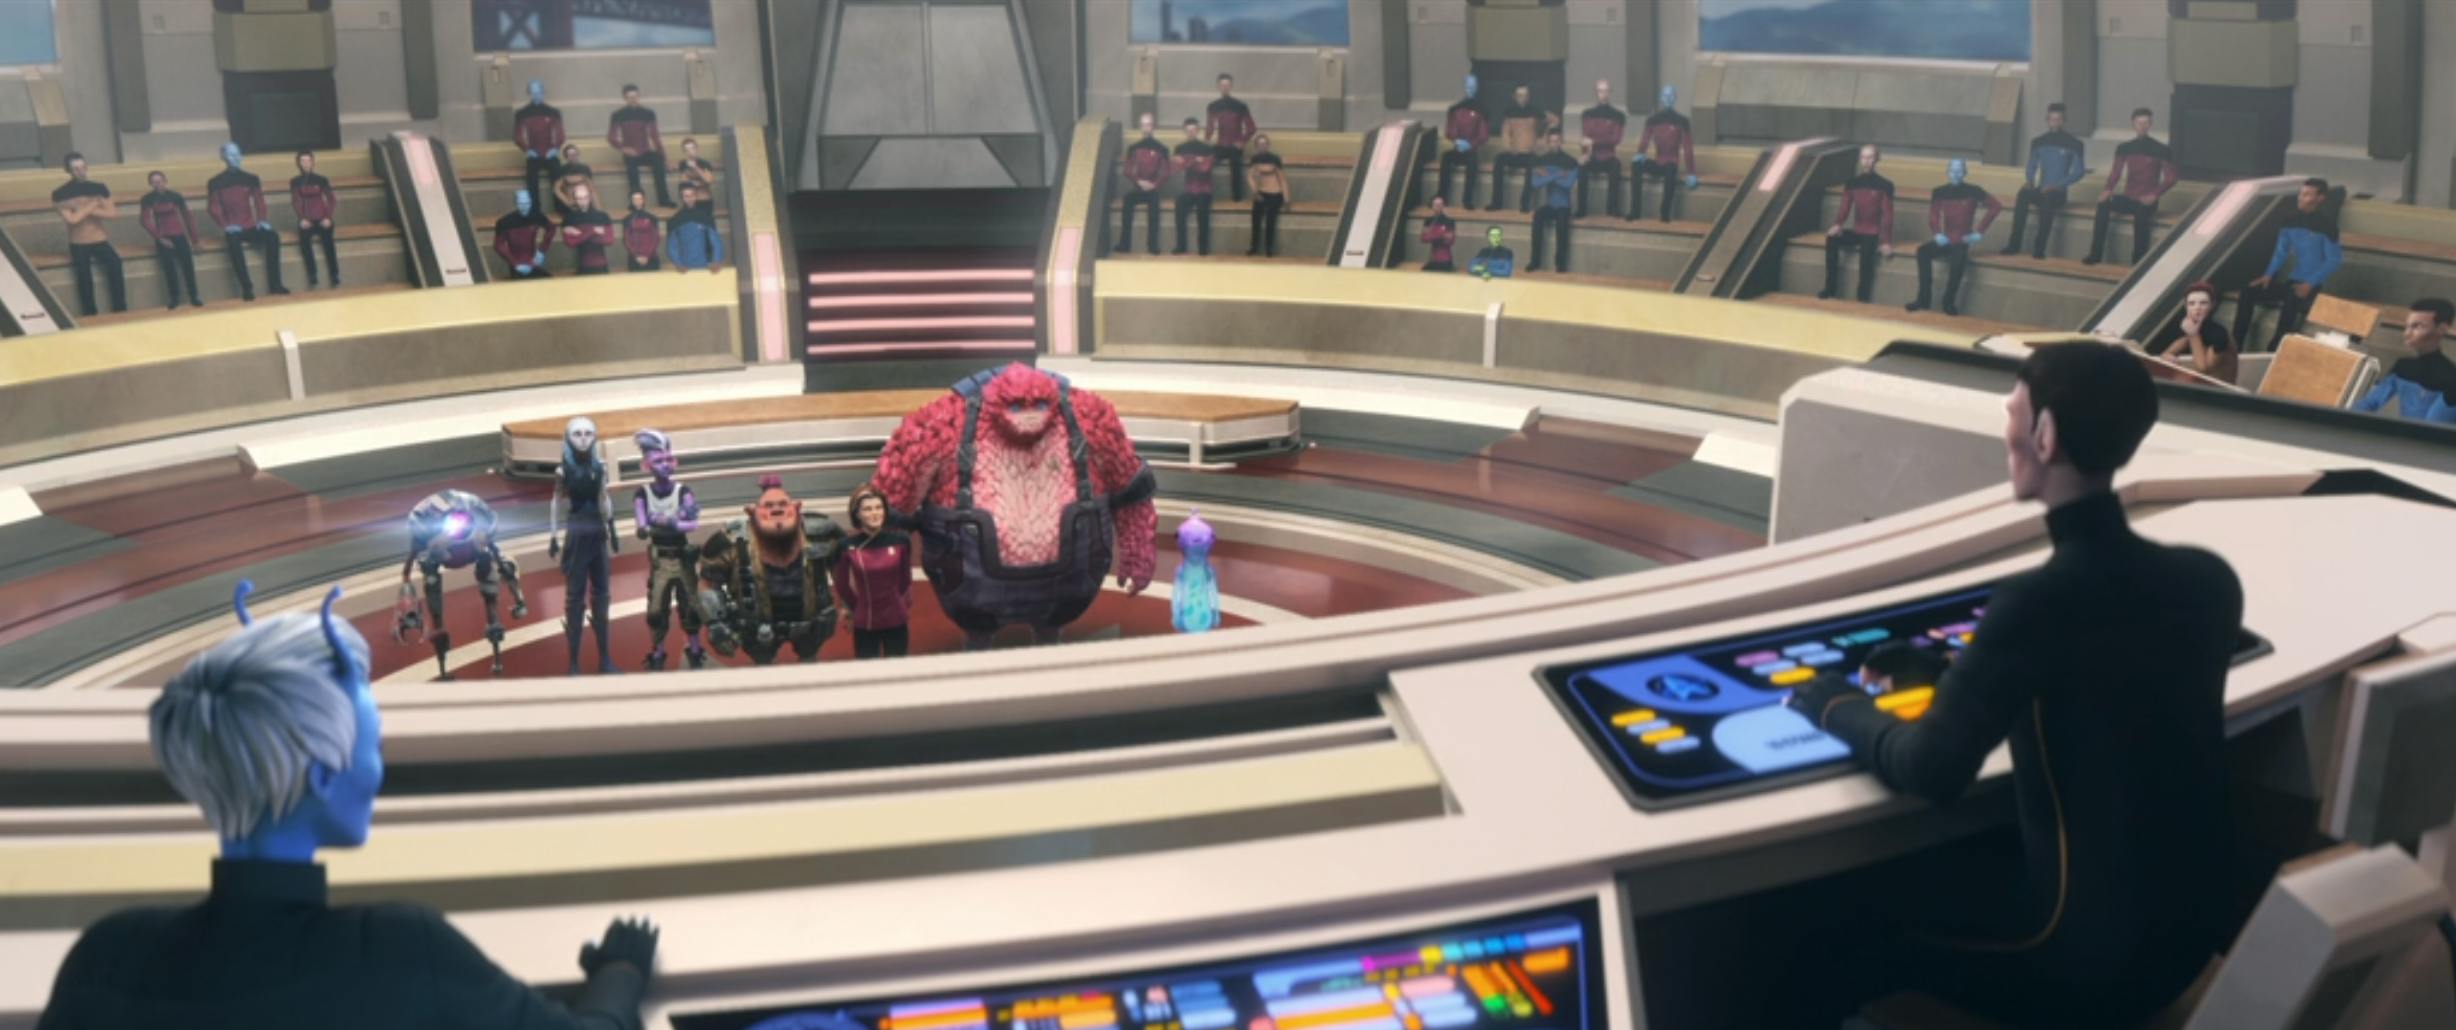 The Protostar crew stands in trial with Janeway in front of Starfleet Academy on Star Trek: Prodigy